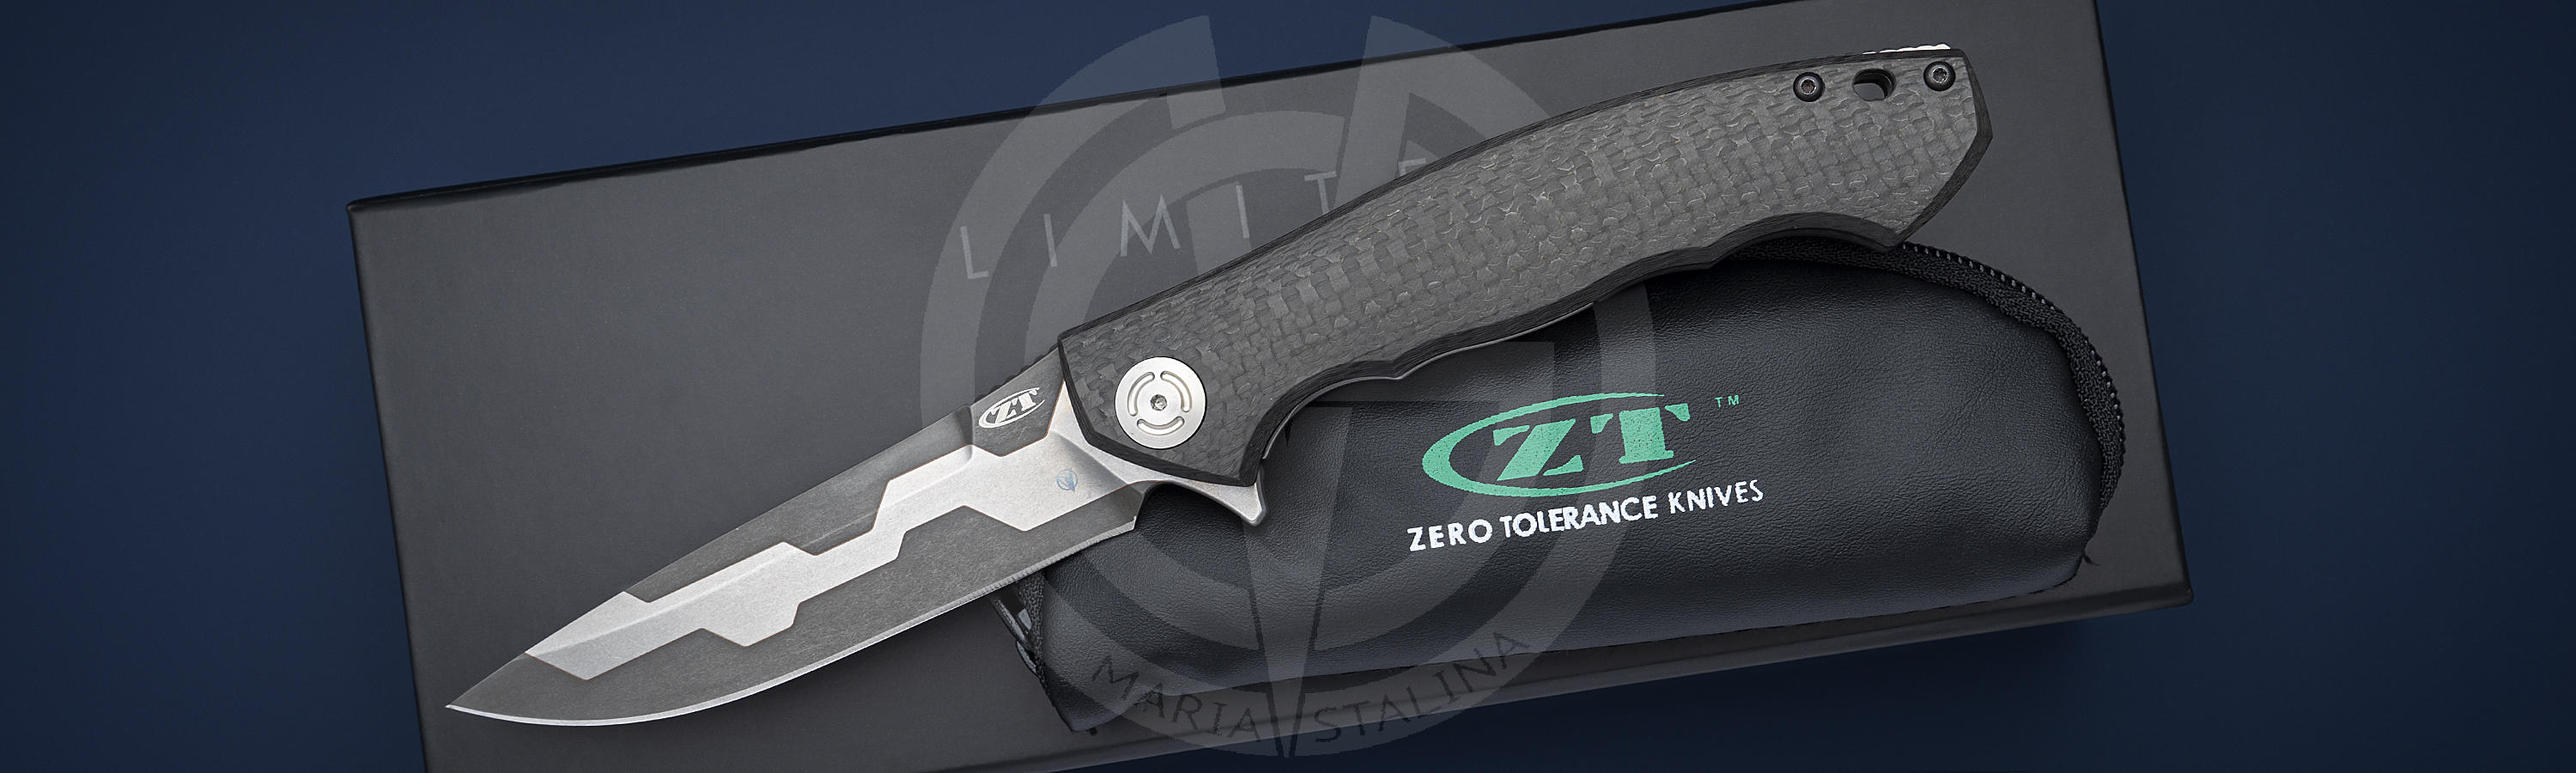 Limited Edition knife